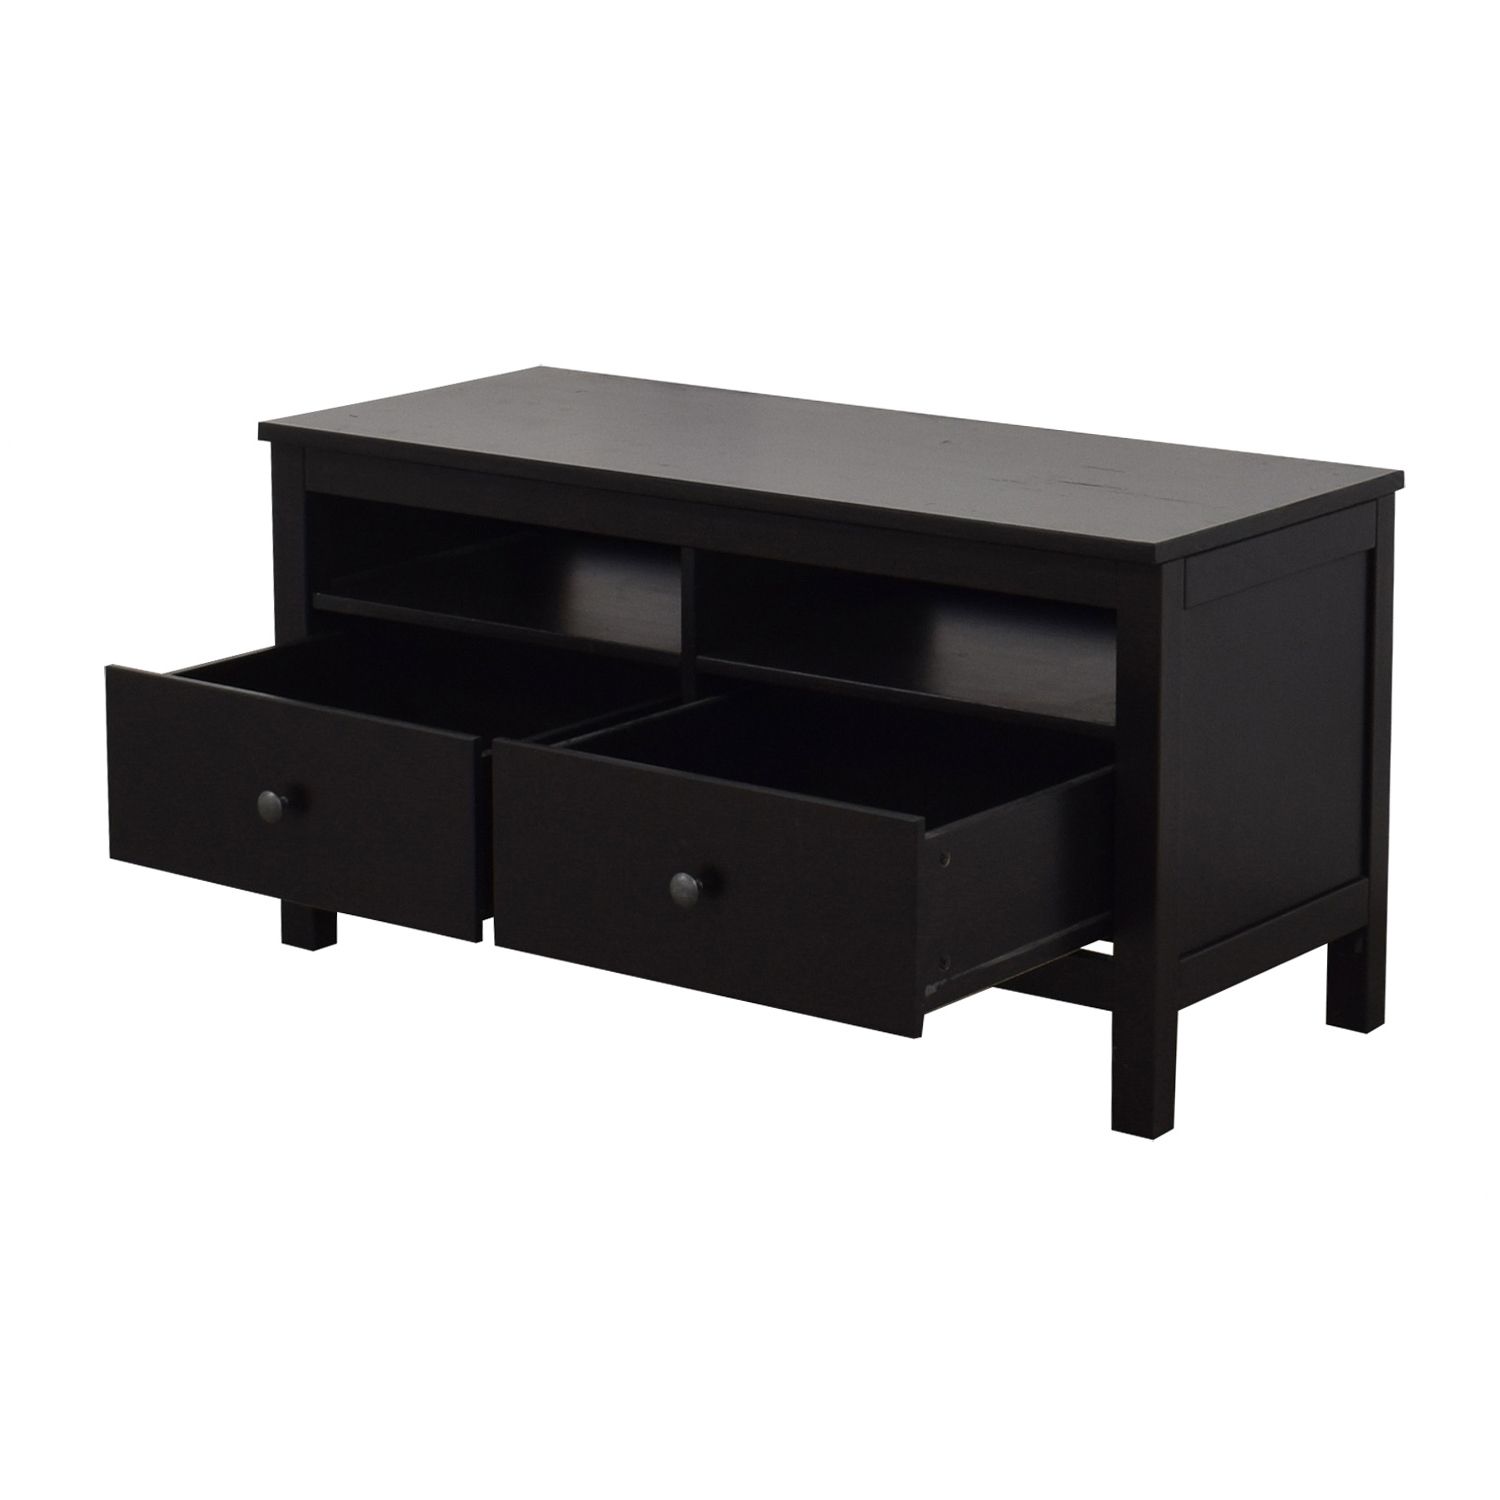 [%78% Off – Ikea Ikea Two Drawer Tv Stand / Storage Pertaining To Newest Manhattan 2 Drawer Media Tv Stands|manhattan 2 Drawer Media Tv Stands Intended For Well Known 78% Off – Ikea Ikea Two Drawer Tv Stand / Storage|most Up To Date Manhattan 2 Drawer Media Tv Stands Intended For 78% Off – Ikea Ikea Two Drawer Tv Stand / Storage|most Popular 78% Off – Ikea Ikea Two Drawer Tv Stand / Storage Inside Manhattan 2 Drawer Media Tv Stands%] (View 21 of 25)